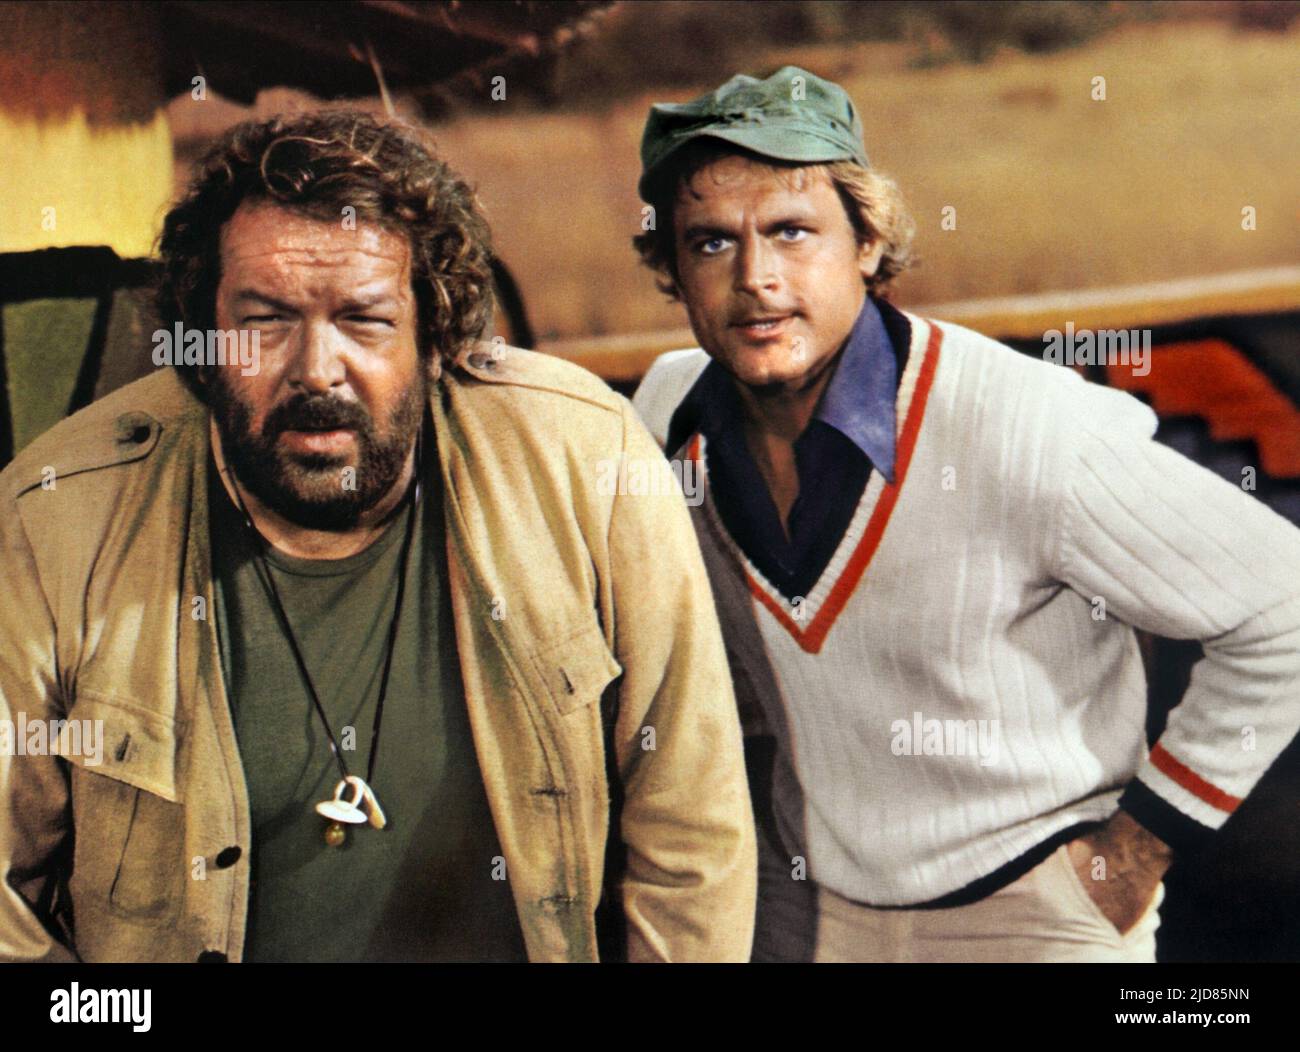 Stream Bud Spencer & Terence Hill - Crime Busters (1st Place